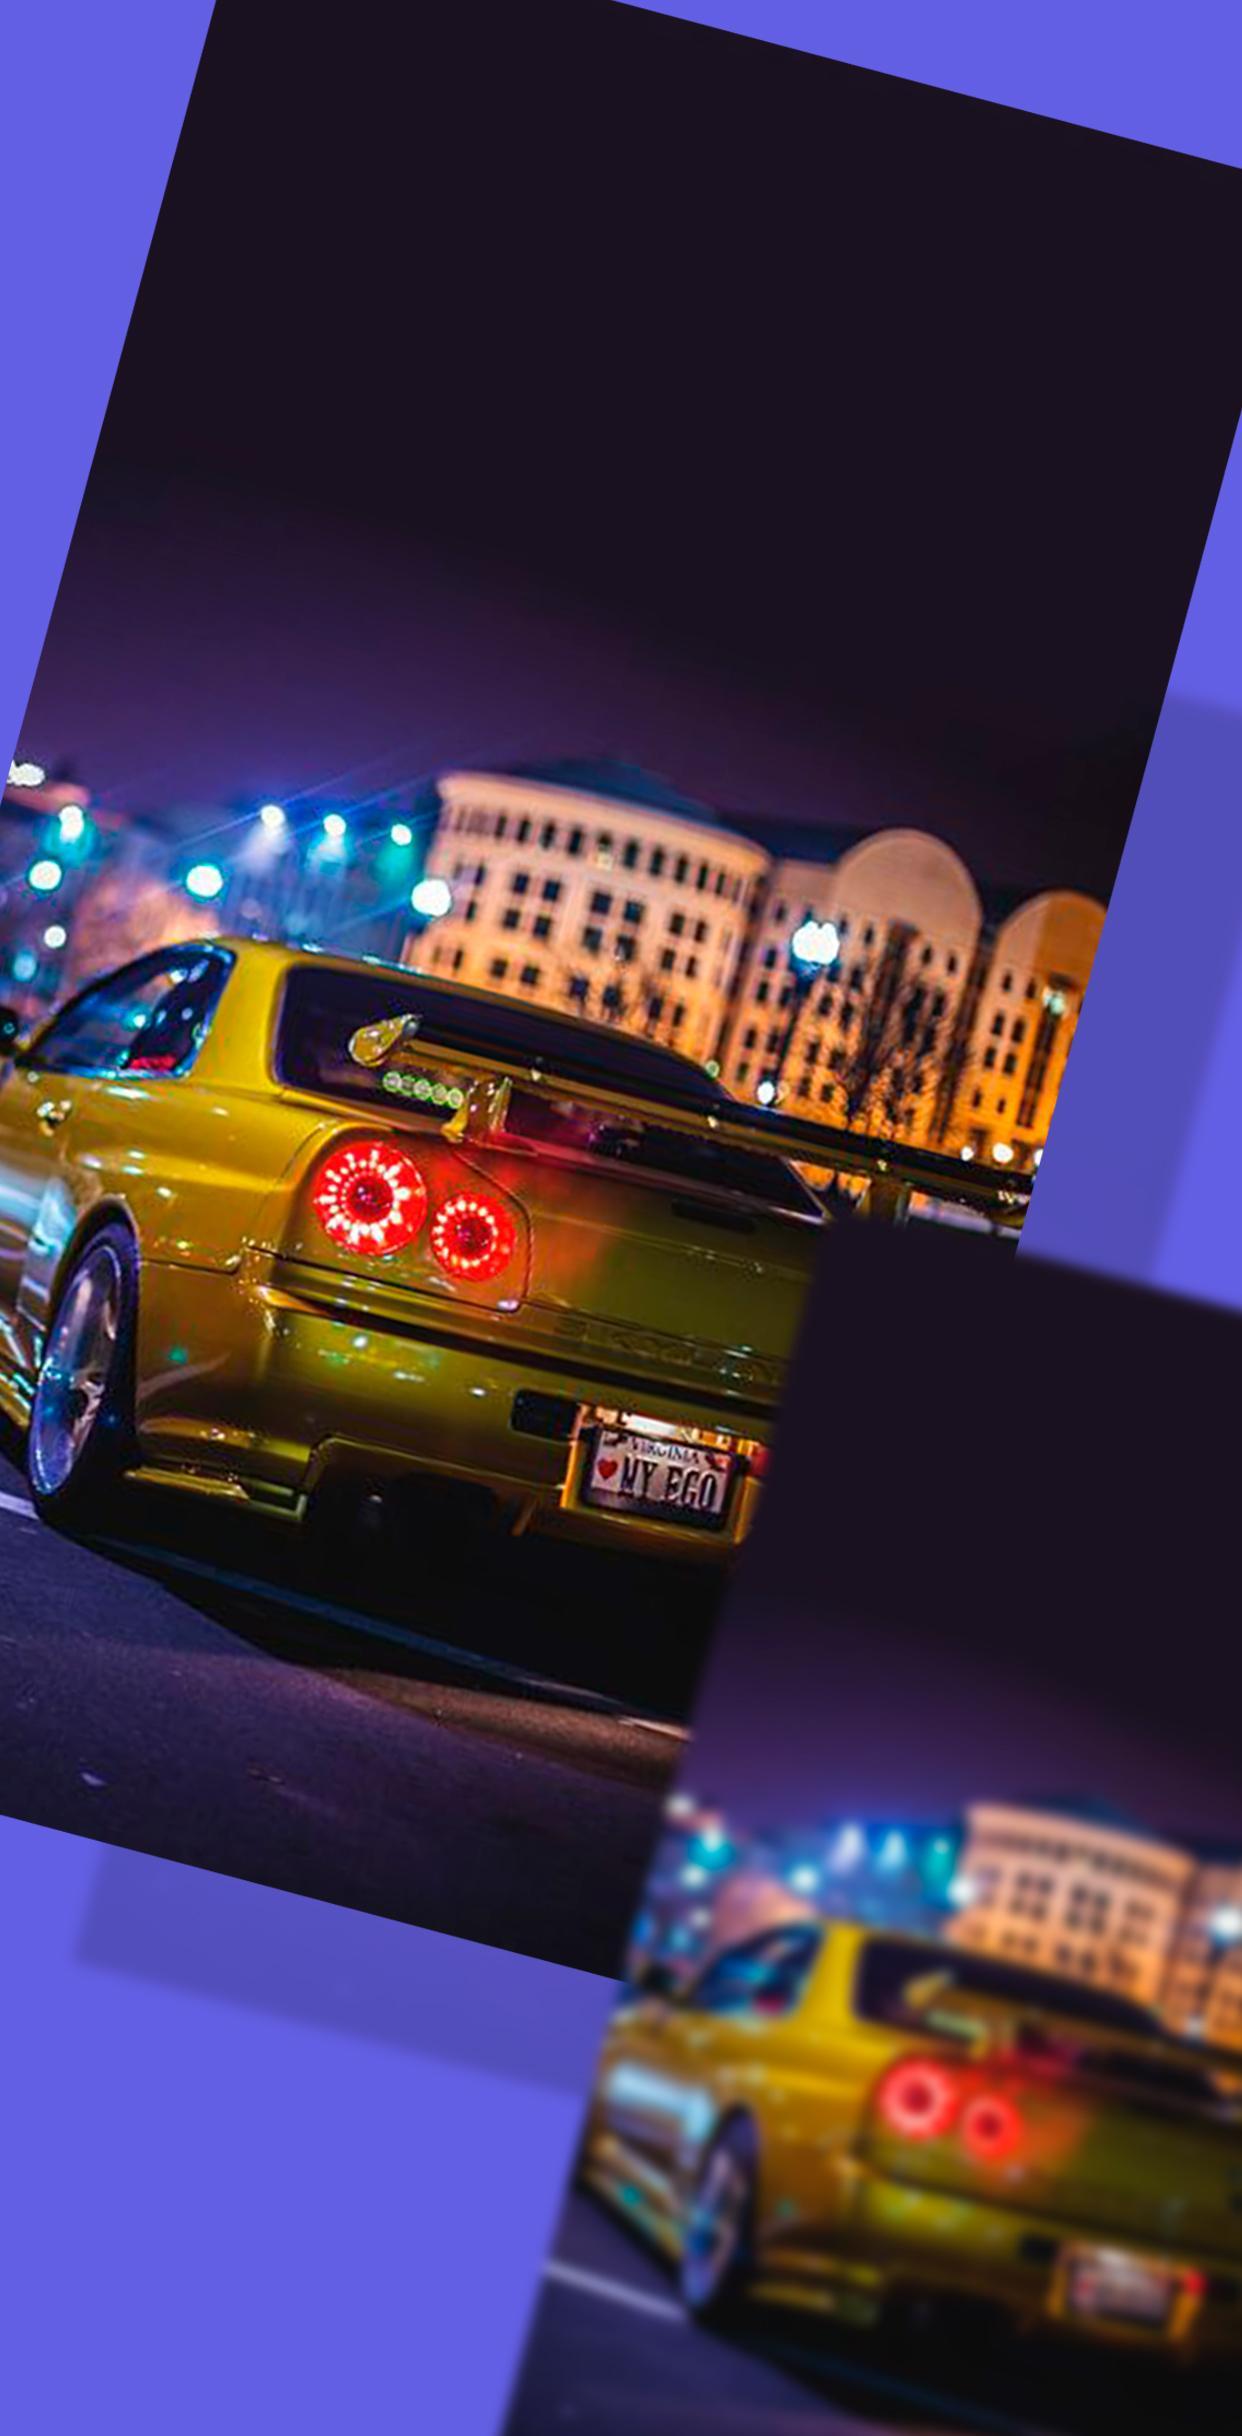 Skyline Gtr R34 Wallpapers Sports Car Wallpapers For Android Apk Download